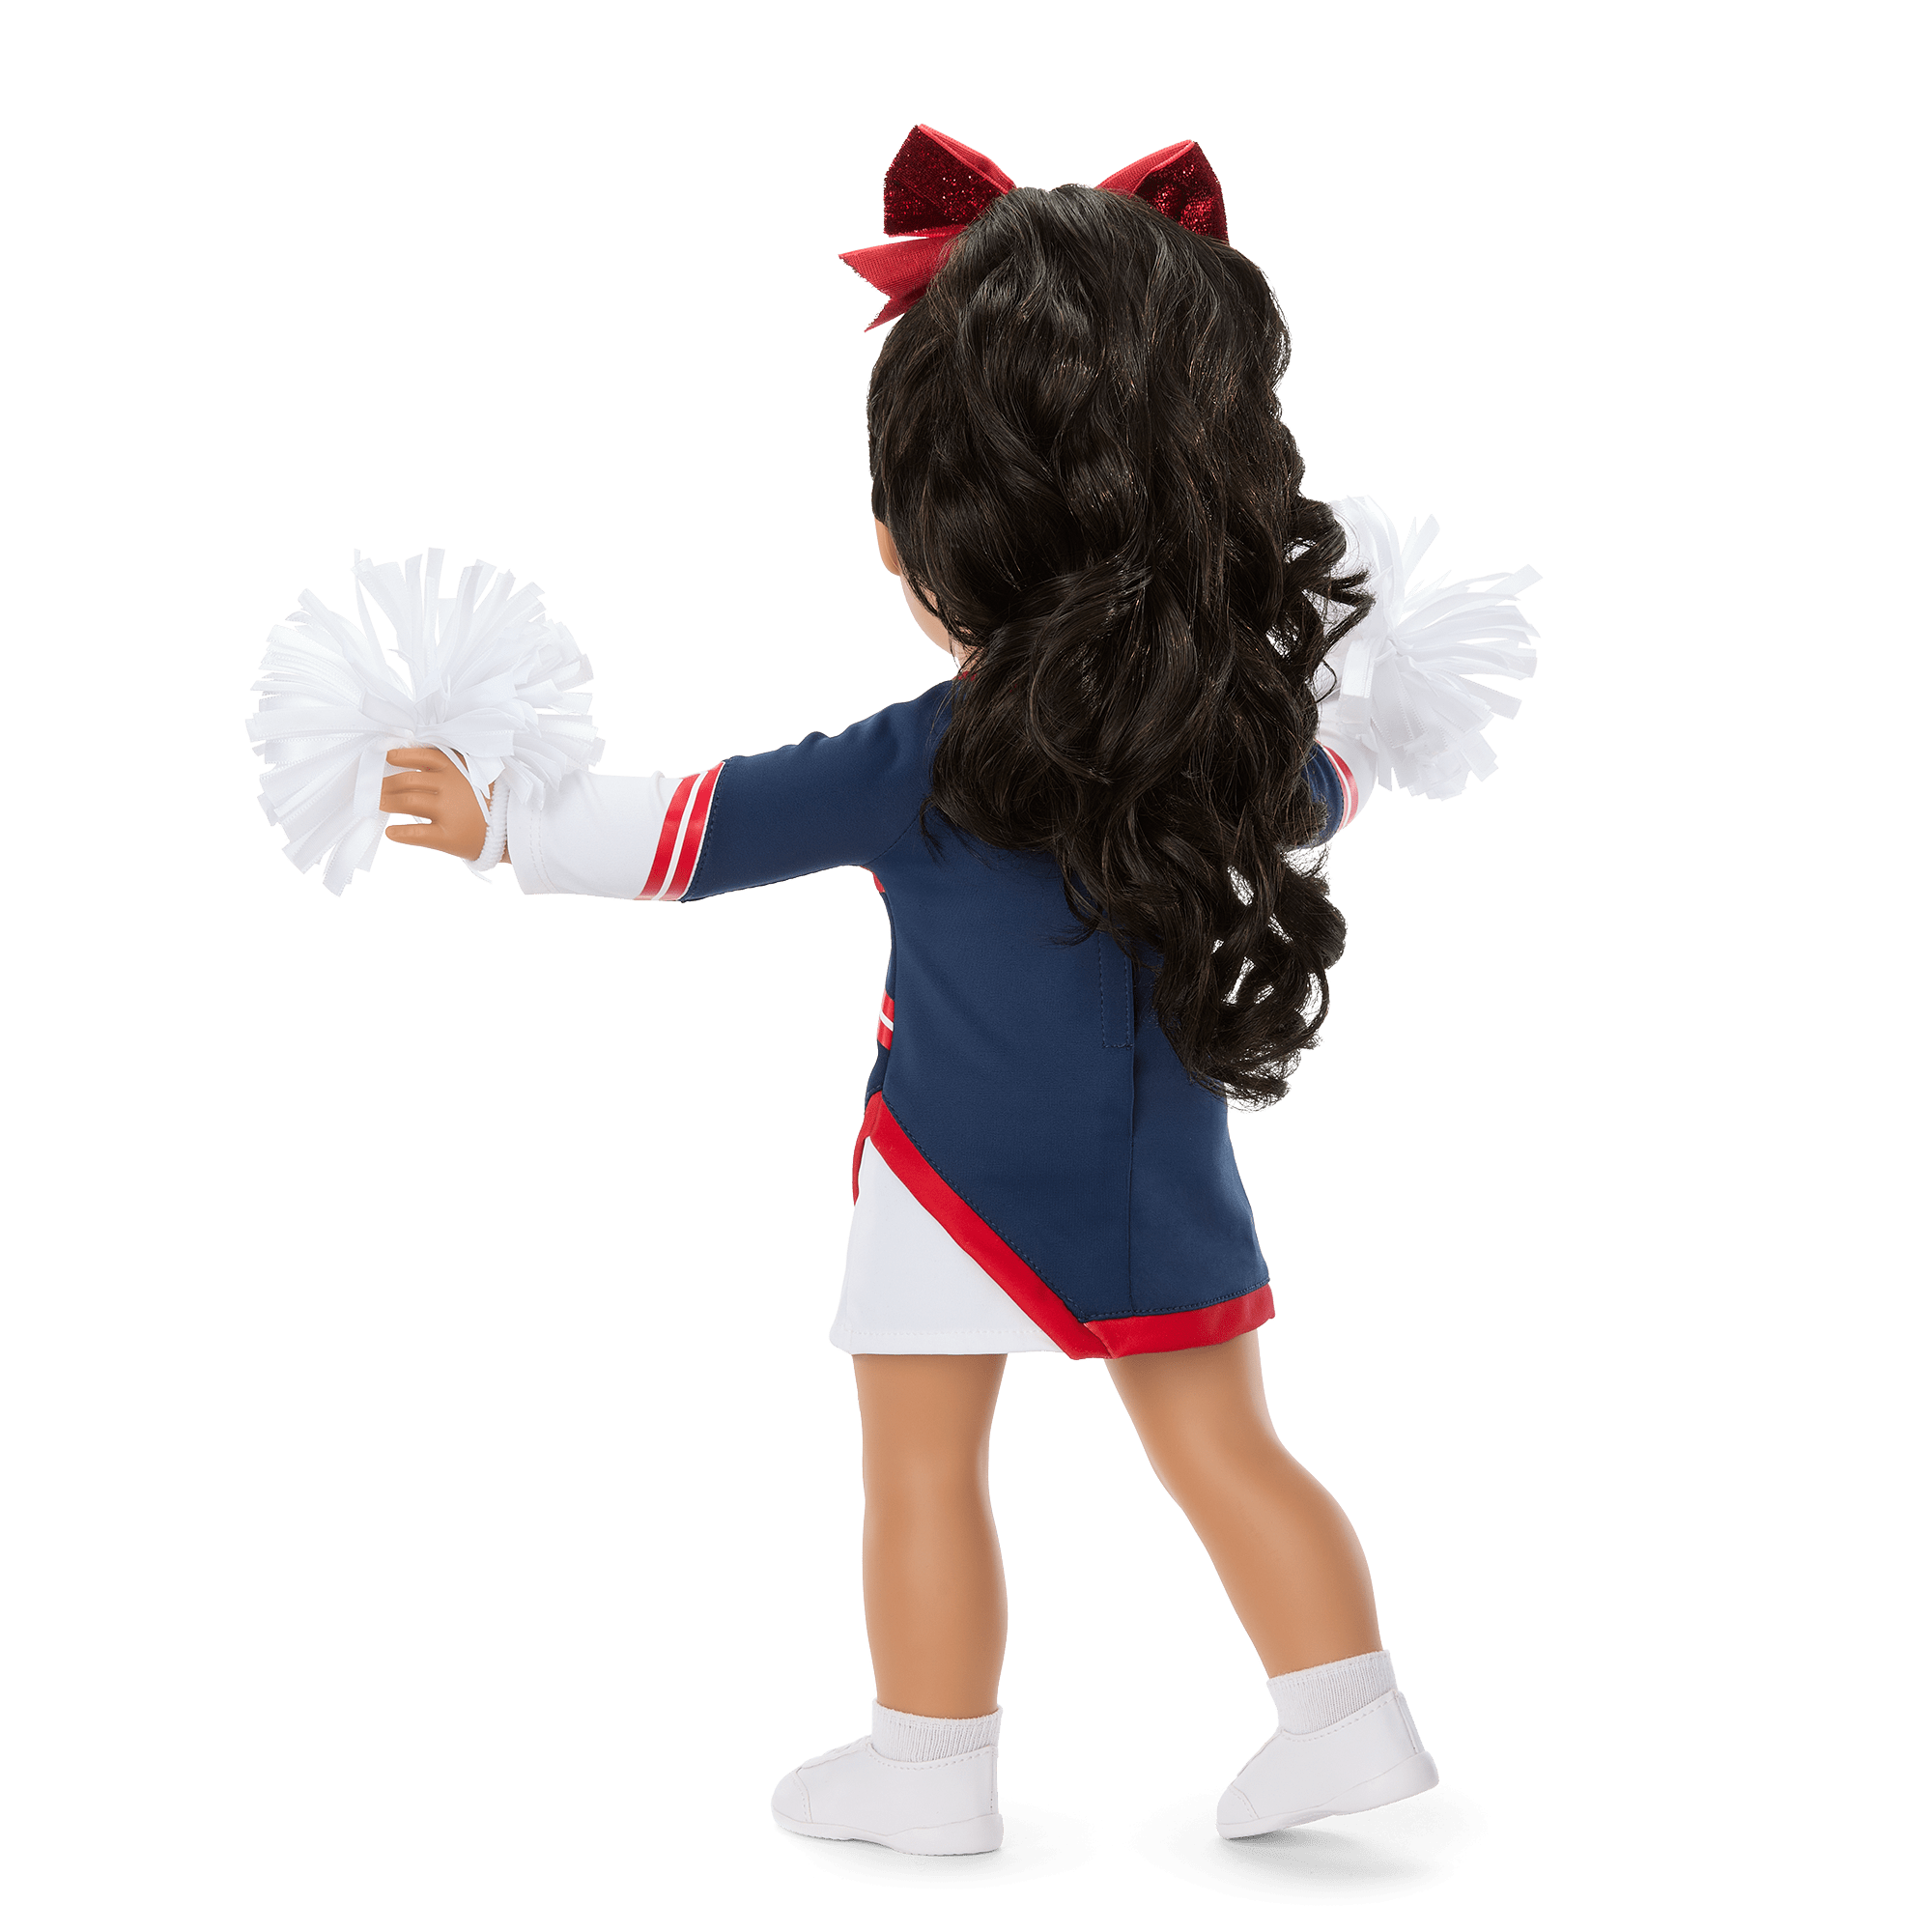 Cheerleading Gifts for Girls 8-10 Small Gift Ideas for 